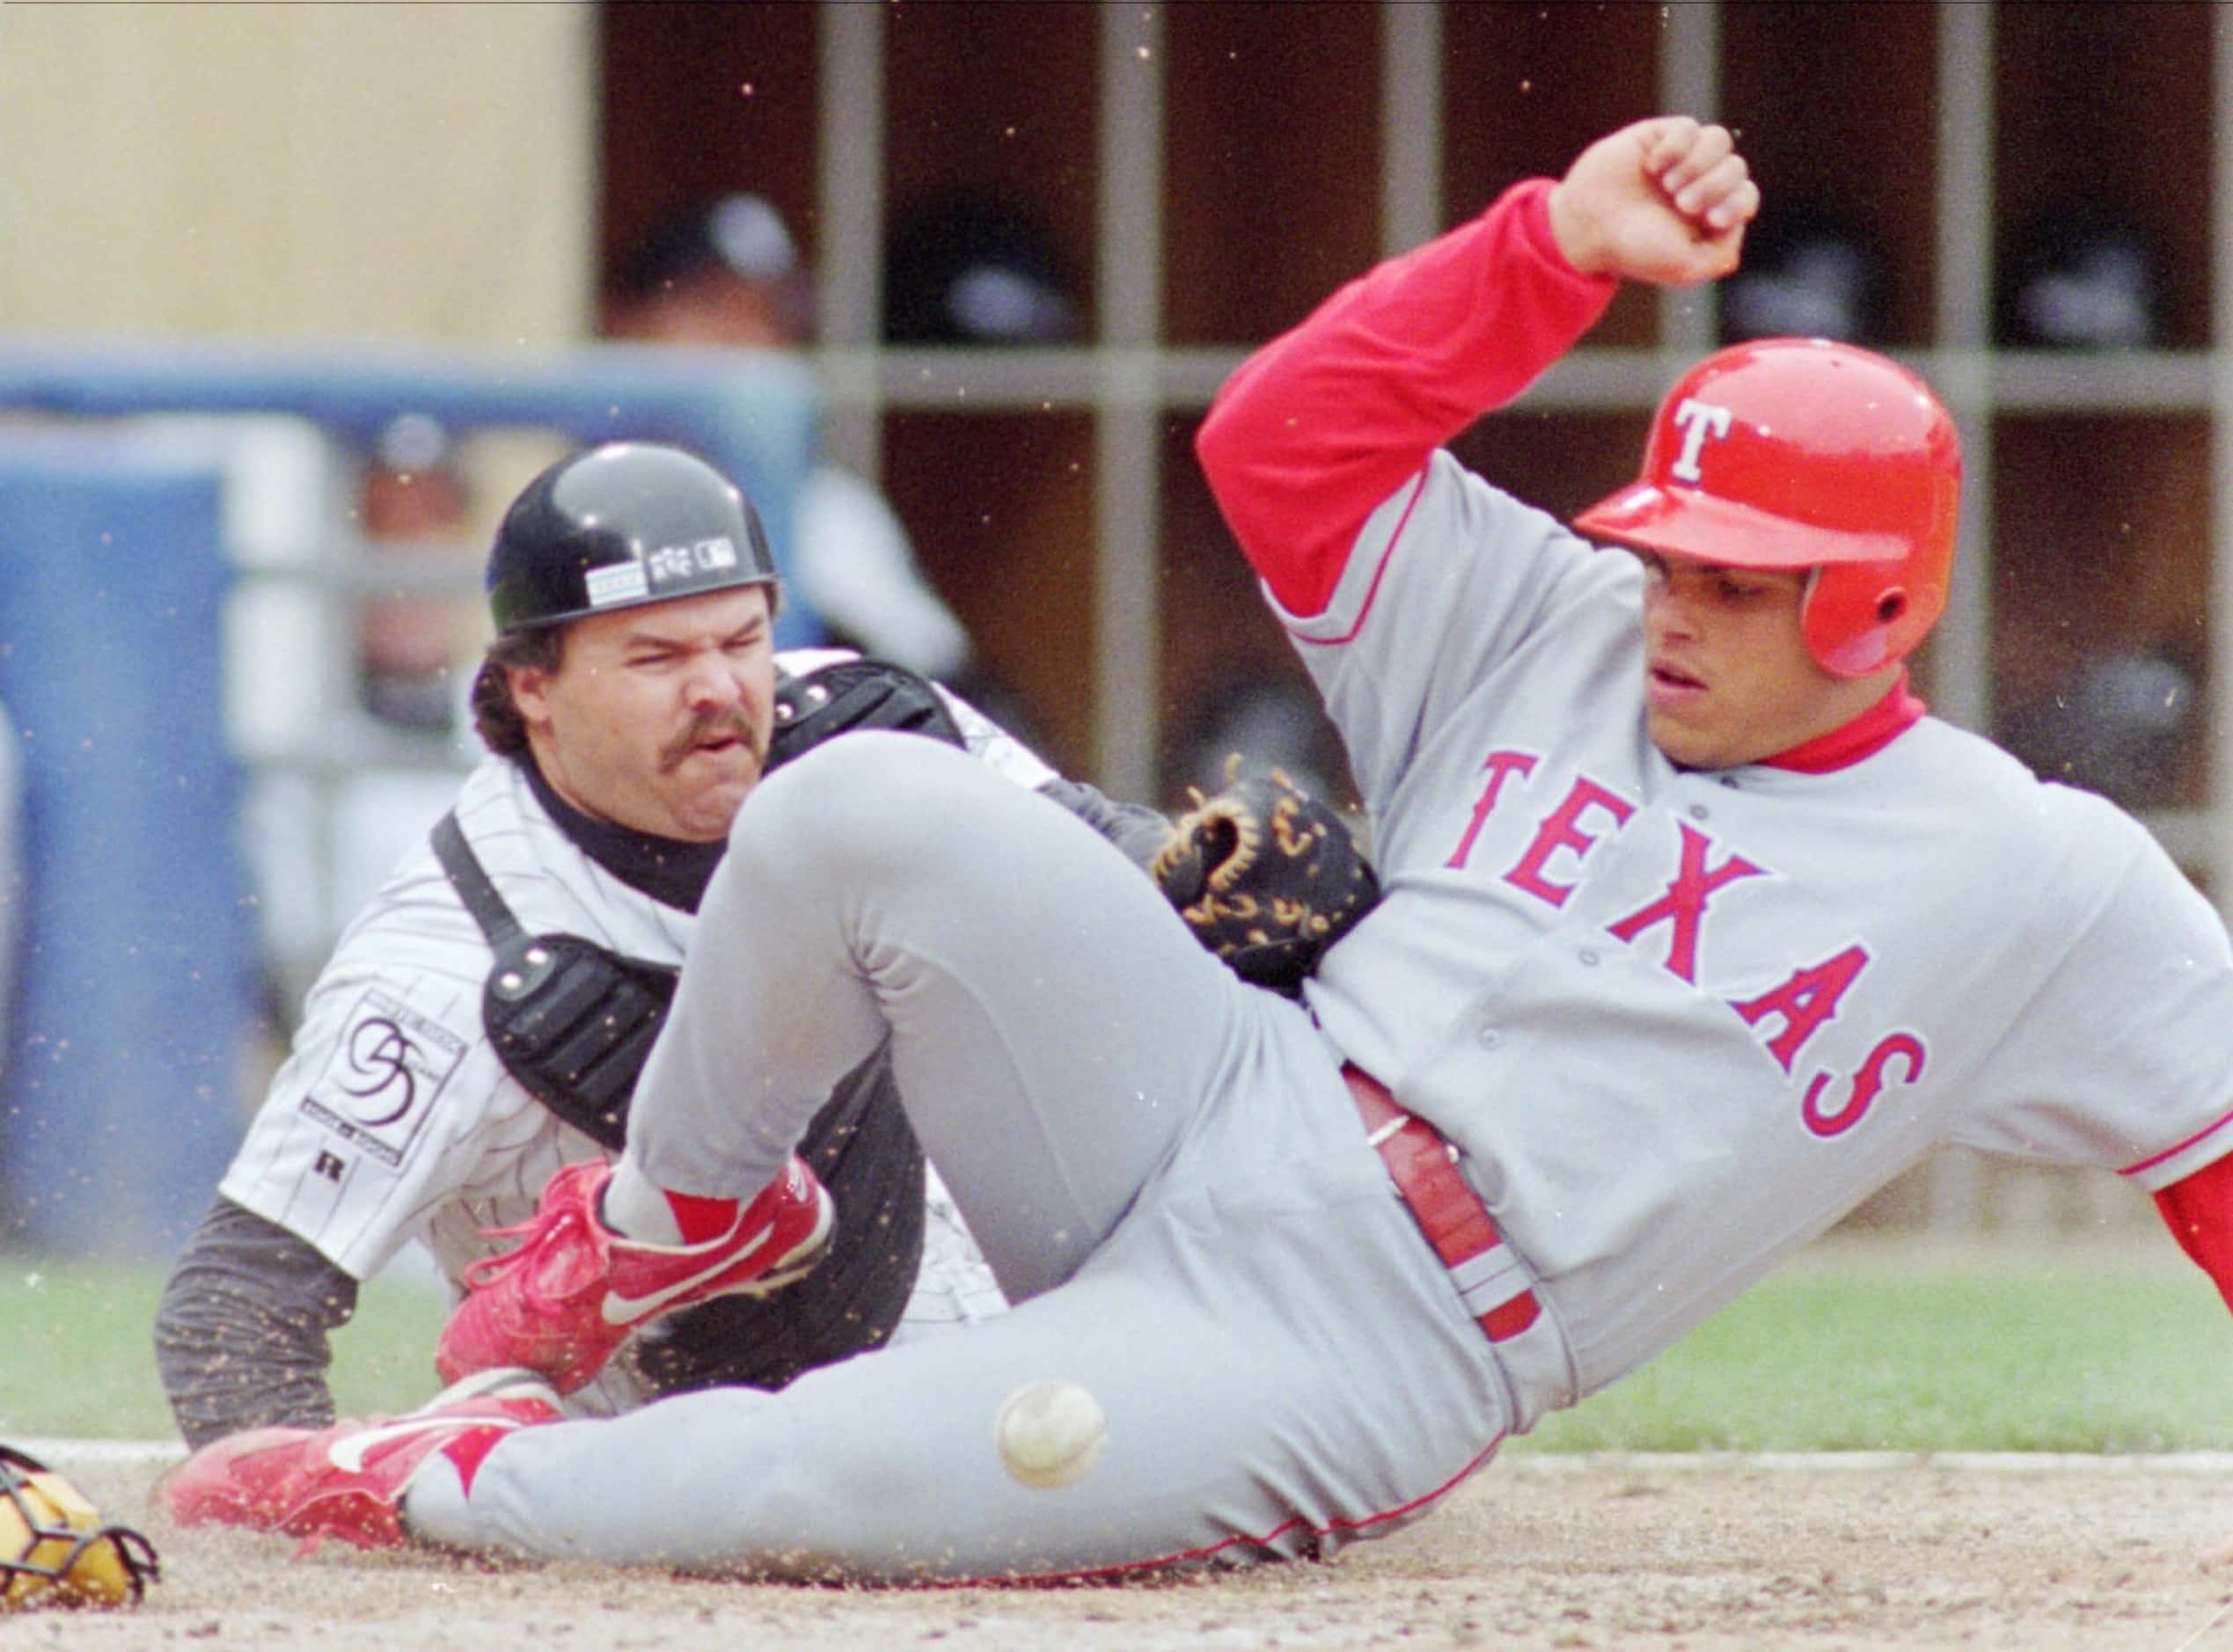 Rangers catcher Ivan Rodriguez slides safely into home in the Rangers' 1996 away grays.